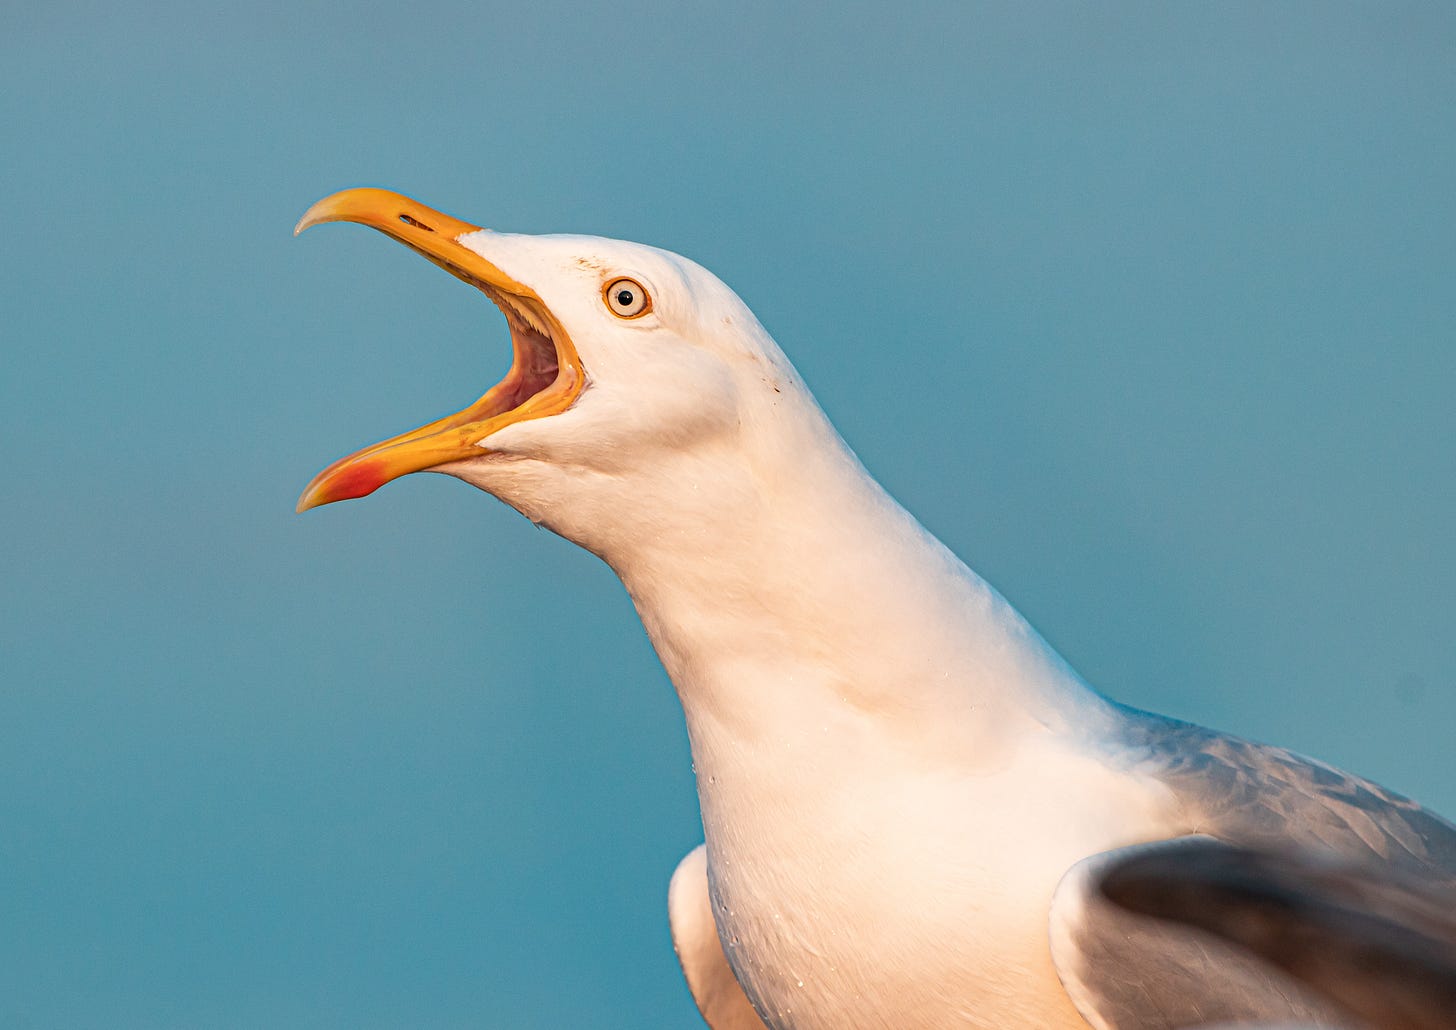 A close-up of a seagull, beak open, against a blue background